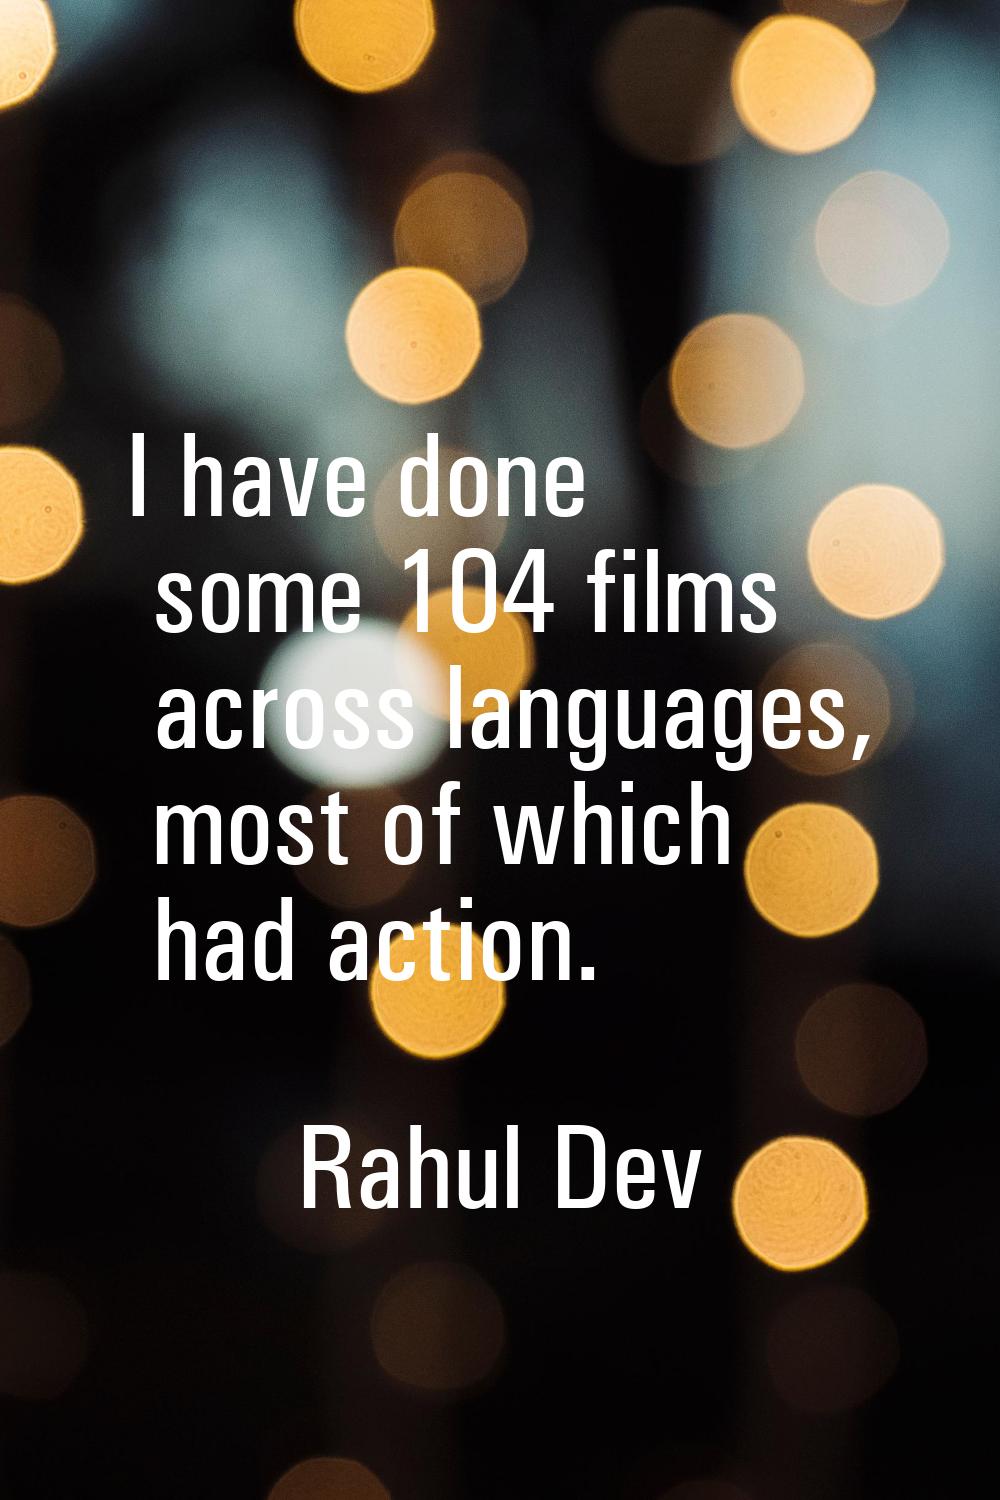 I have done some 104 films across languages, most of which had action.